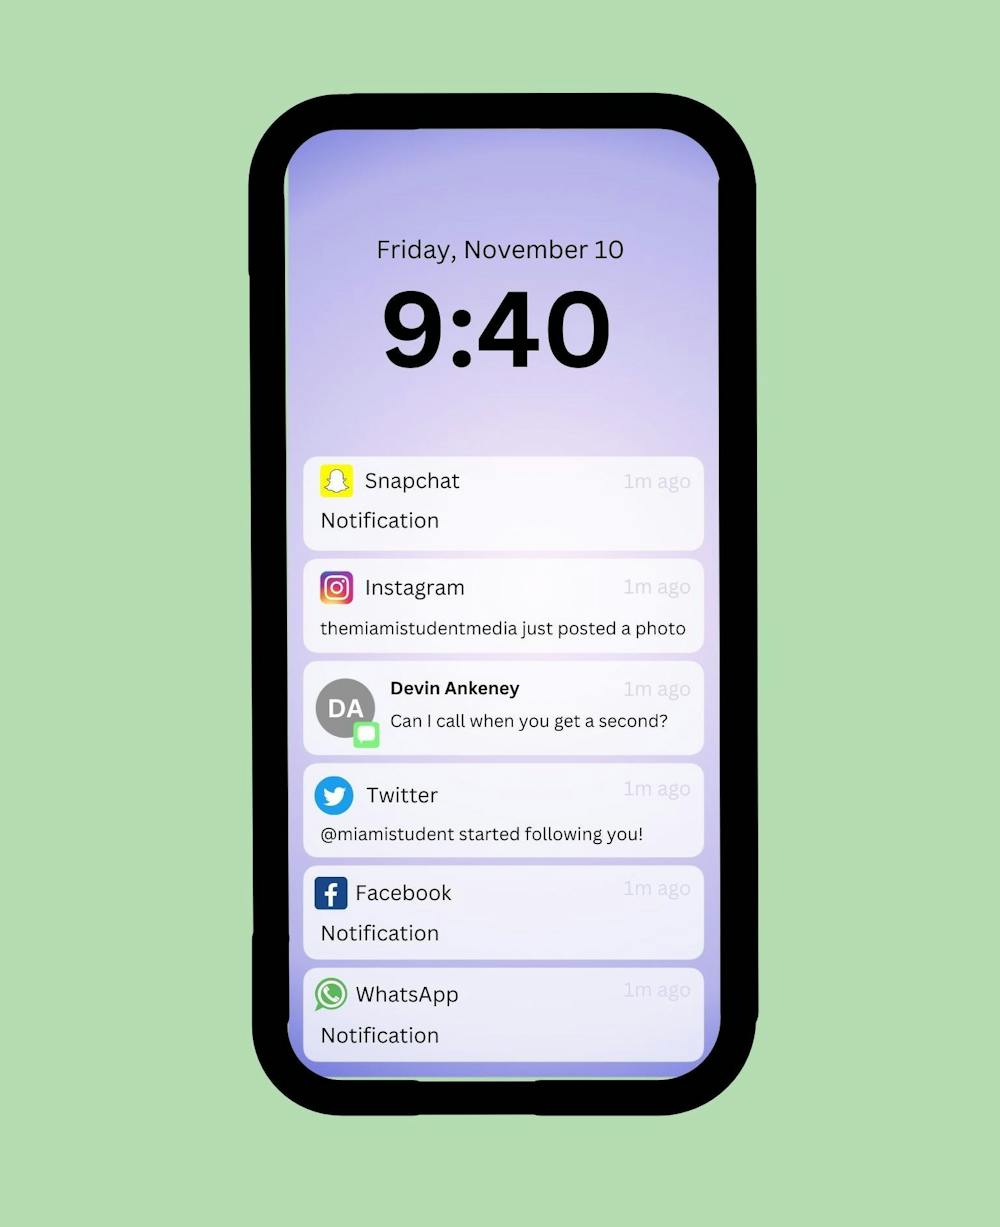 <p>For all intents and purposes, our communication apps all do the same thing. Our phones constantly blow up with copies of the same alert from different apps﻿.</p>